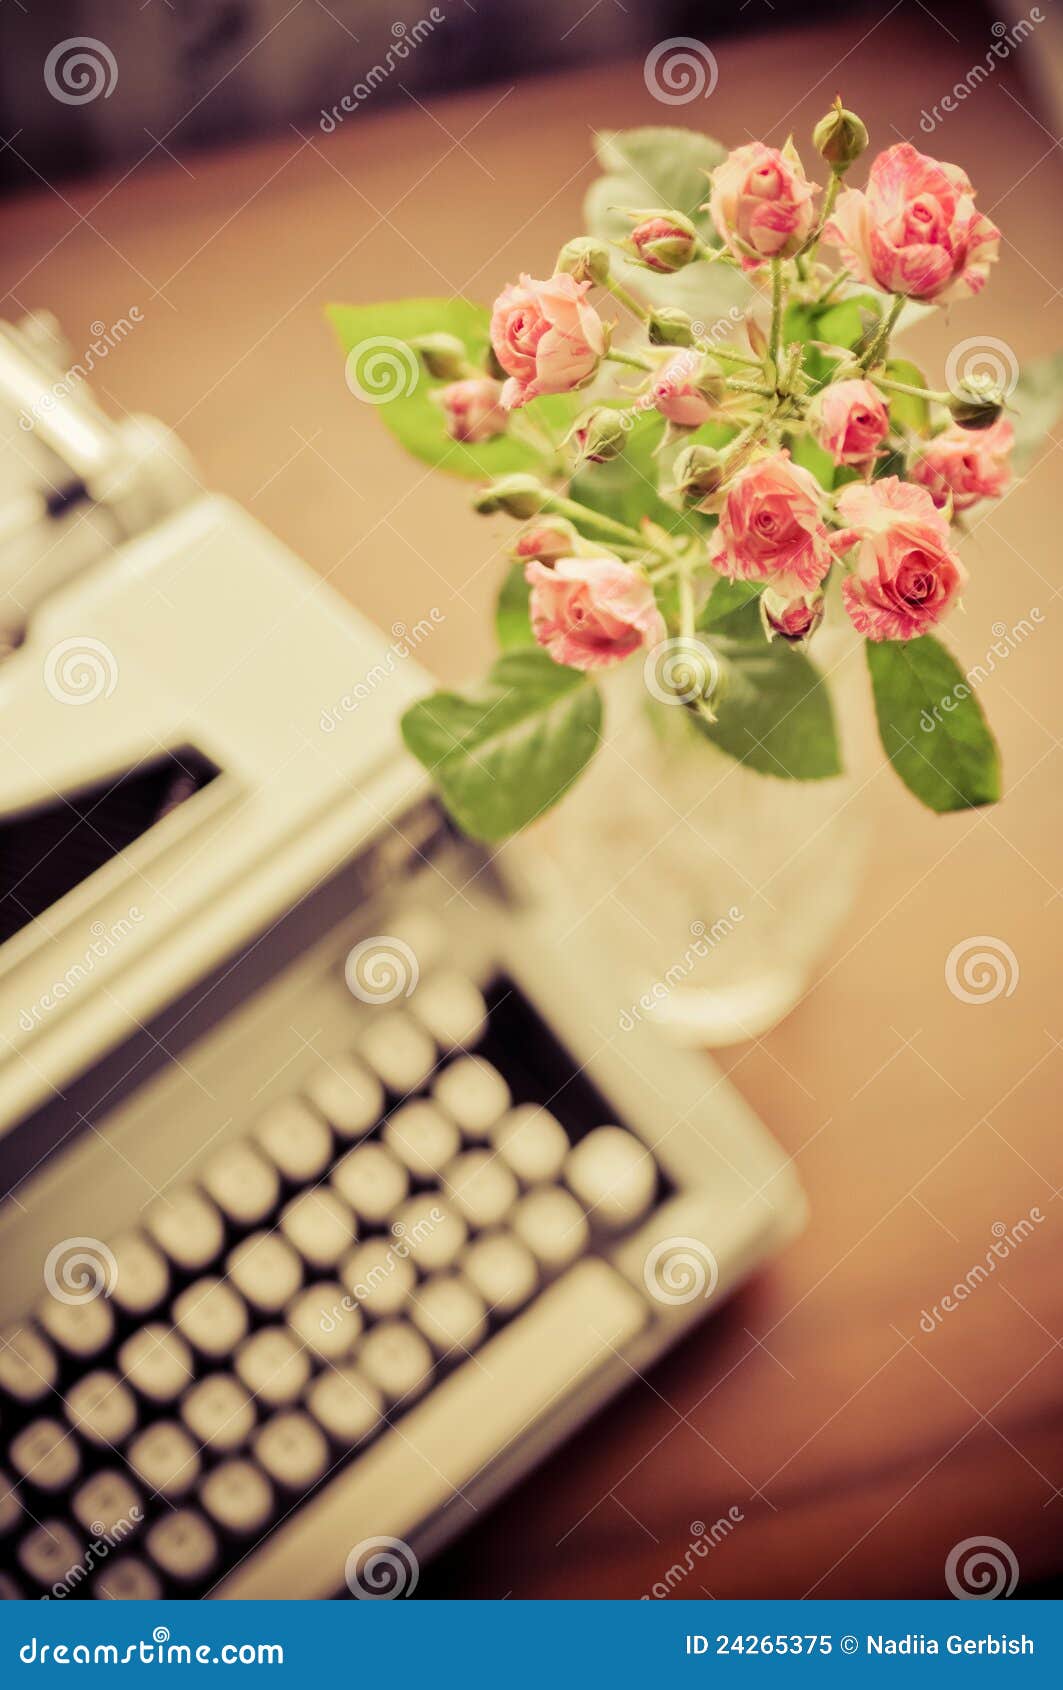 roses and old type-writer